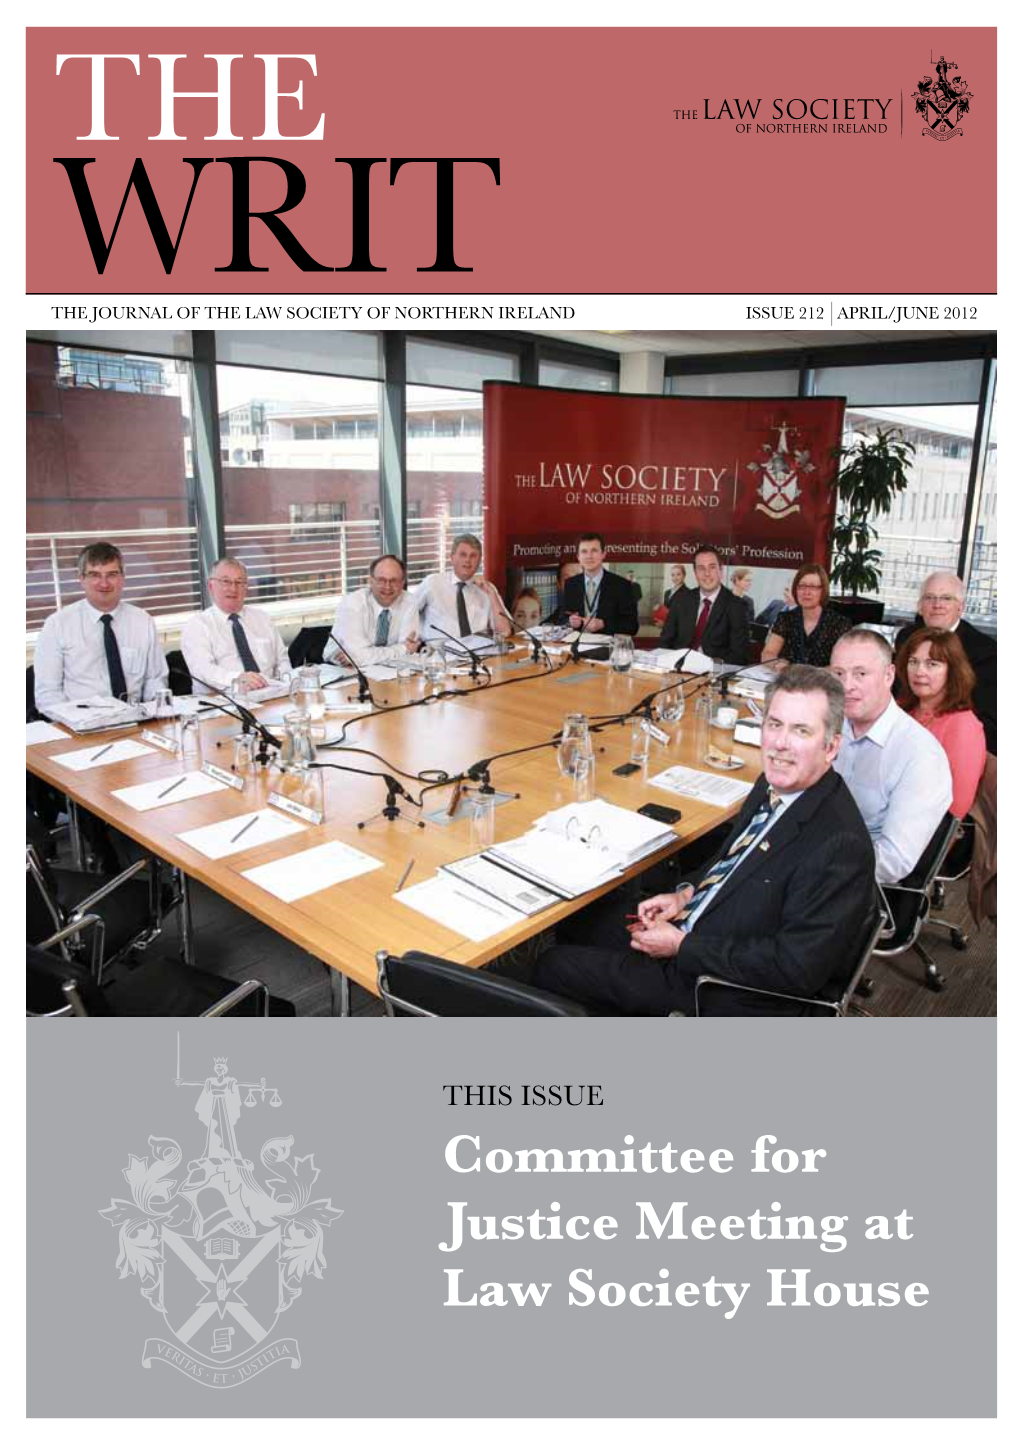 Writ the Journal of the Law Society of Northern Ireland Issue 212 April/June 2012